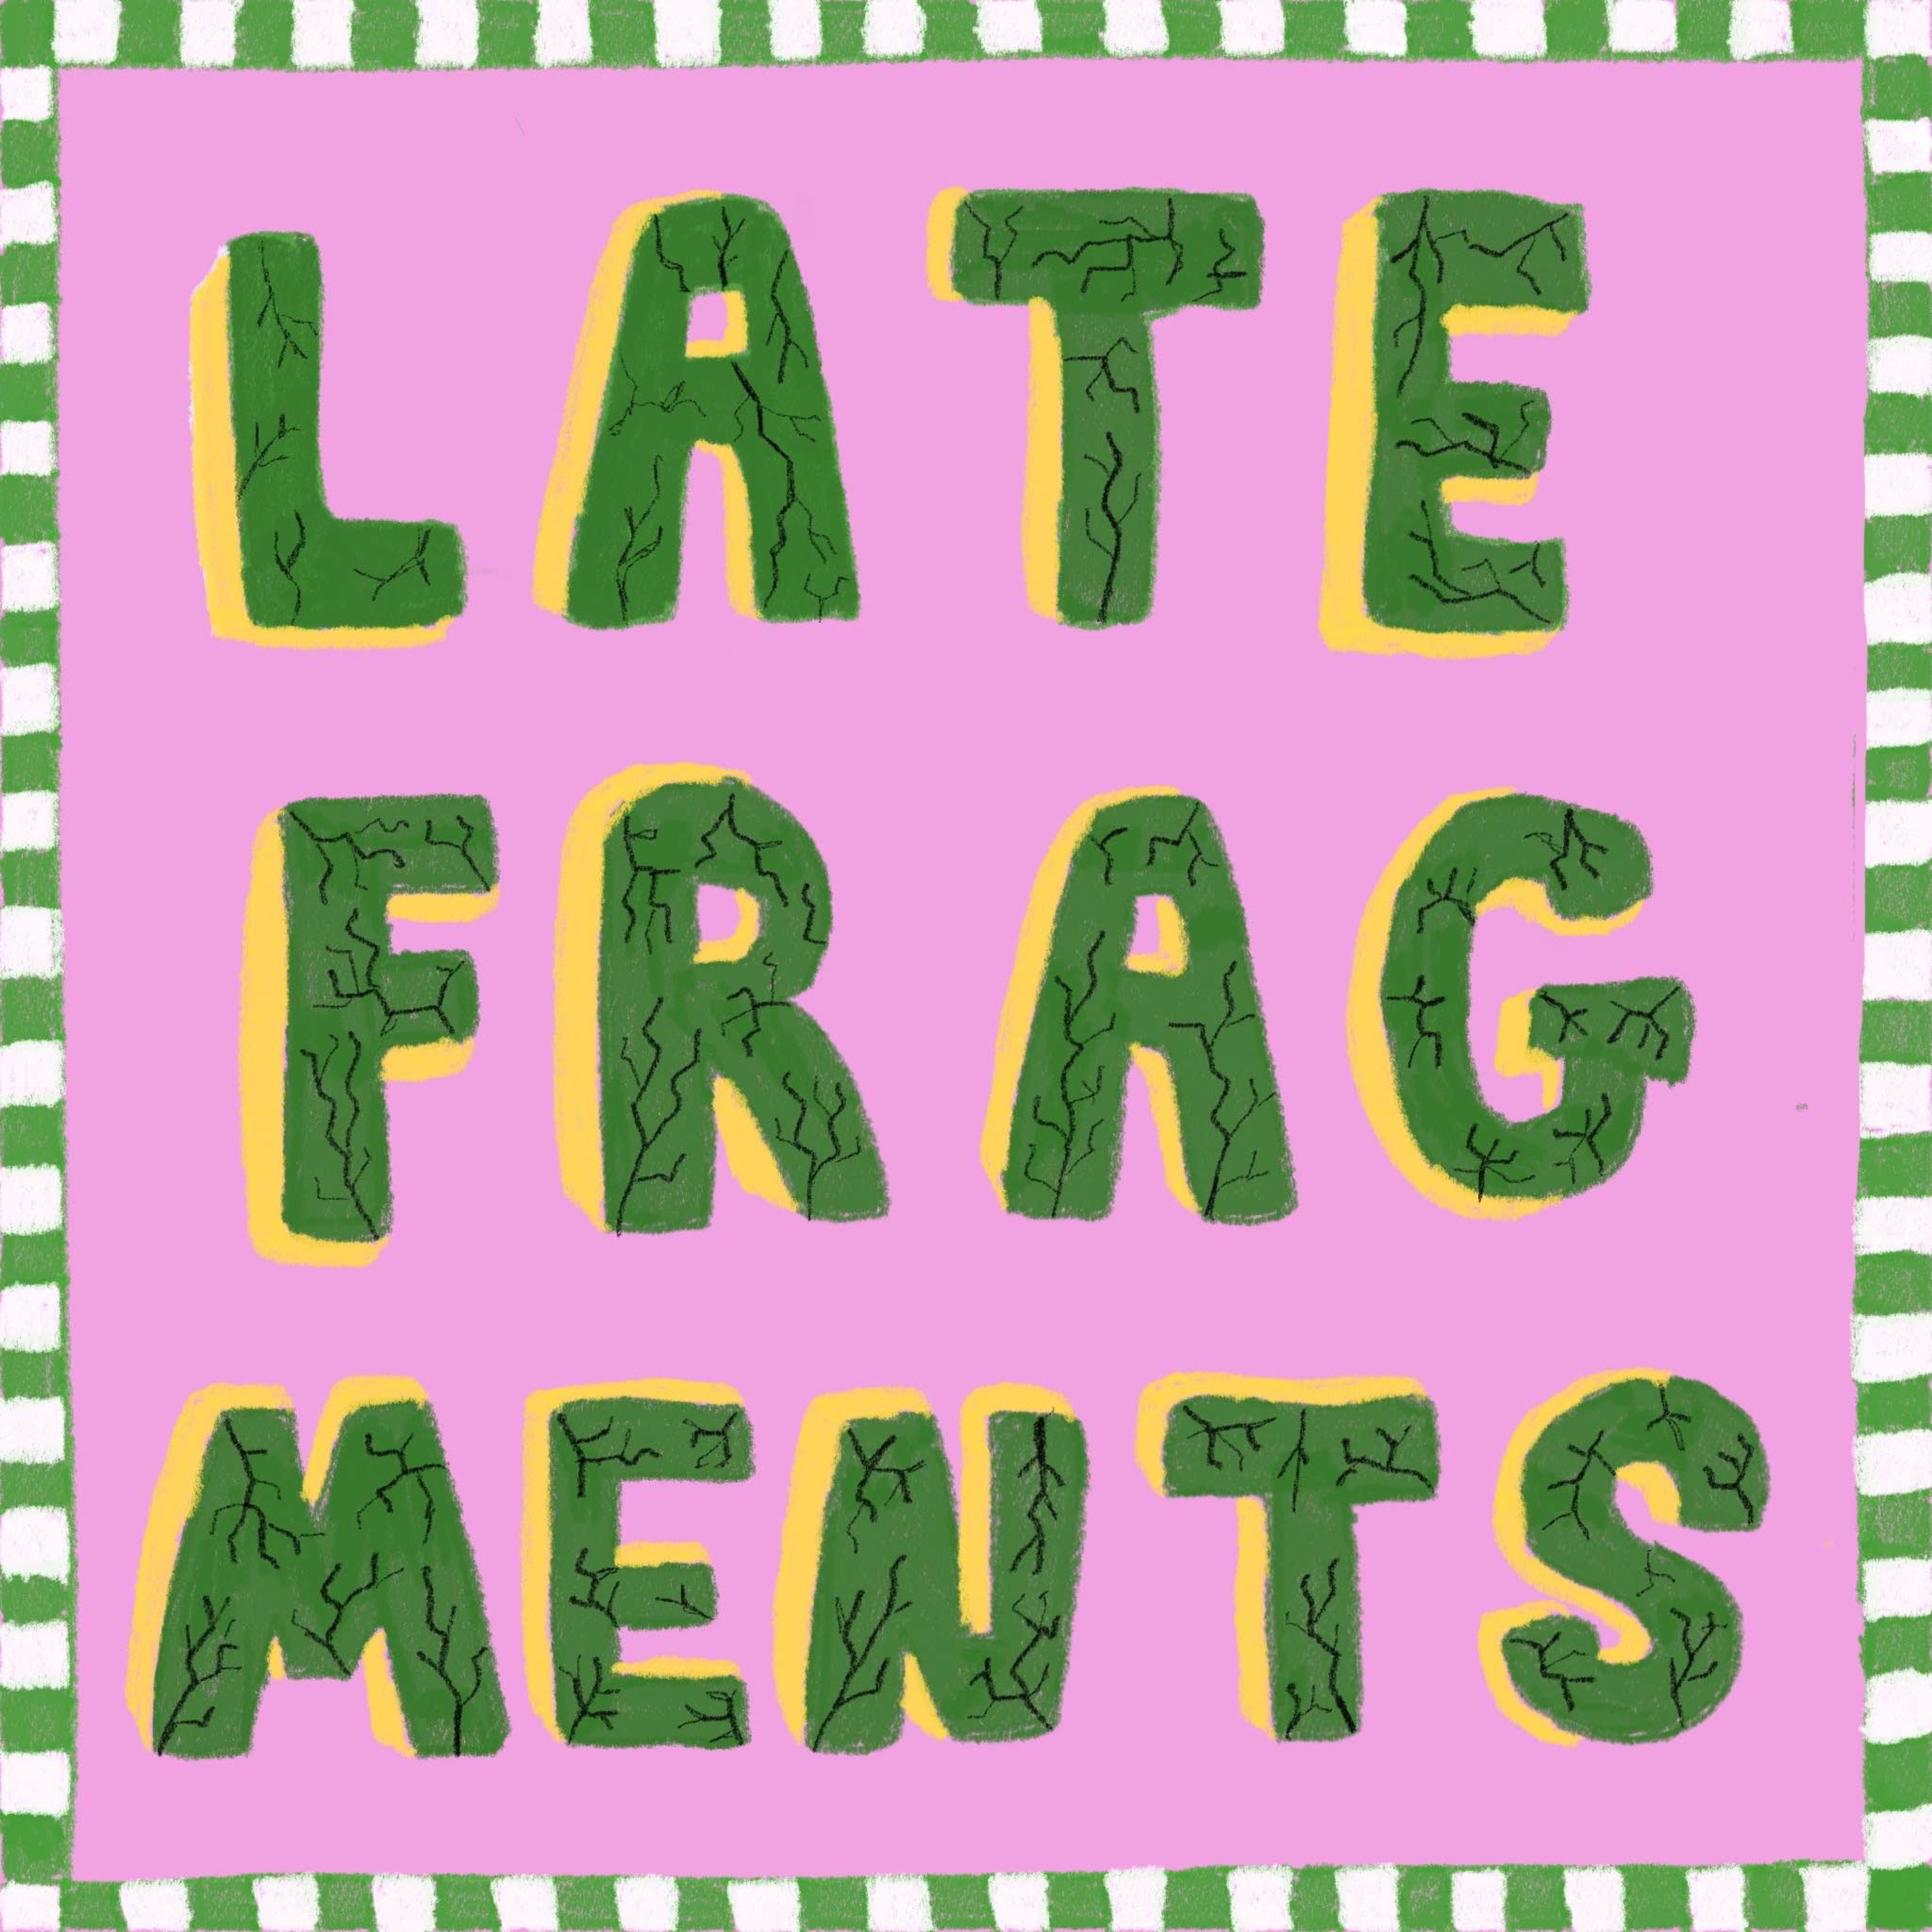 Late Fragments Podcast podcast show image